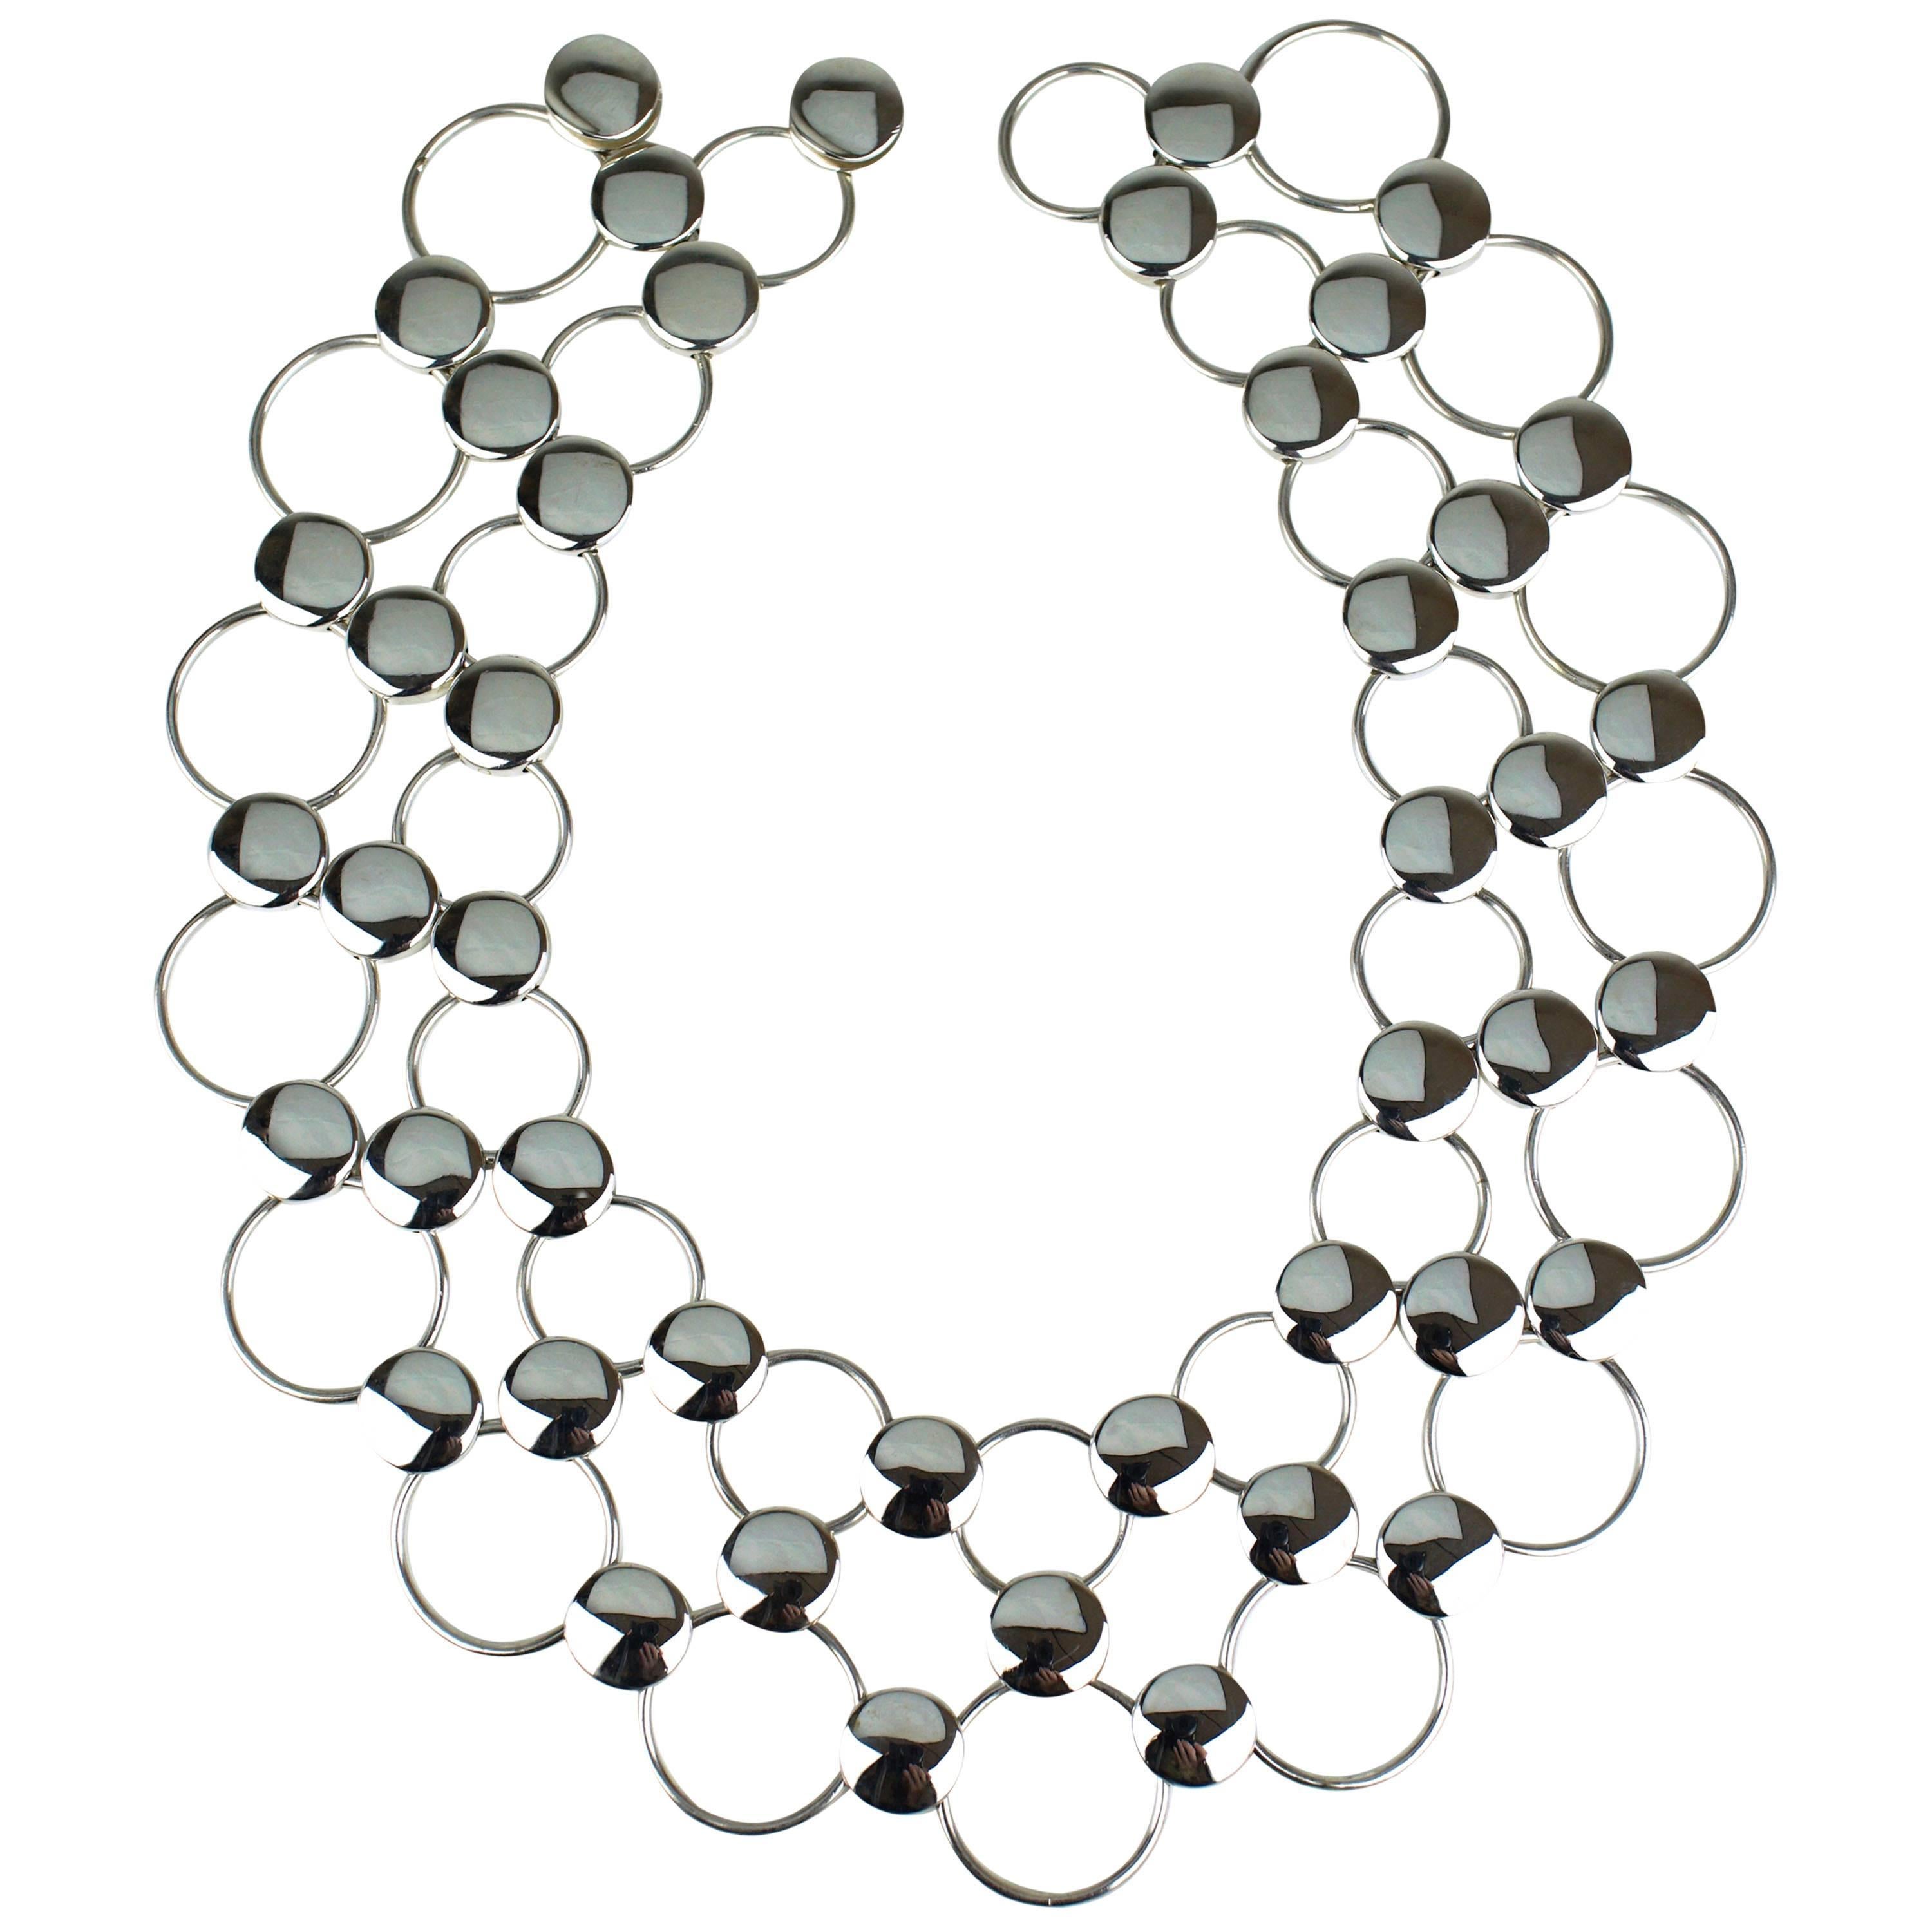 Georg Jensen silver dot and ring necklace - design number 464